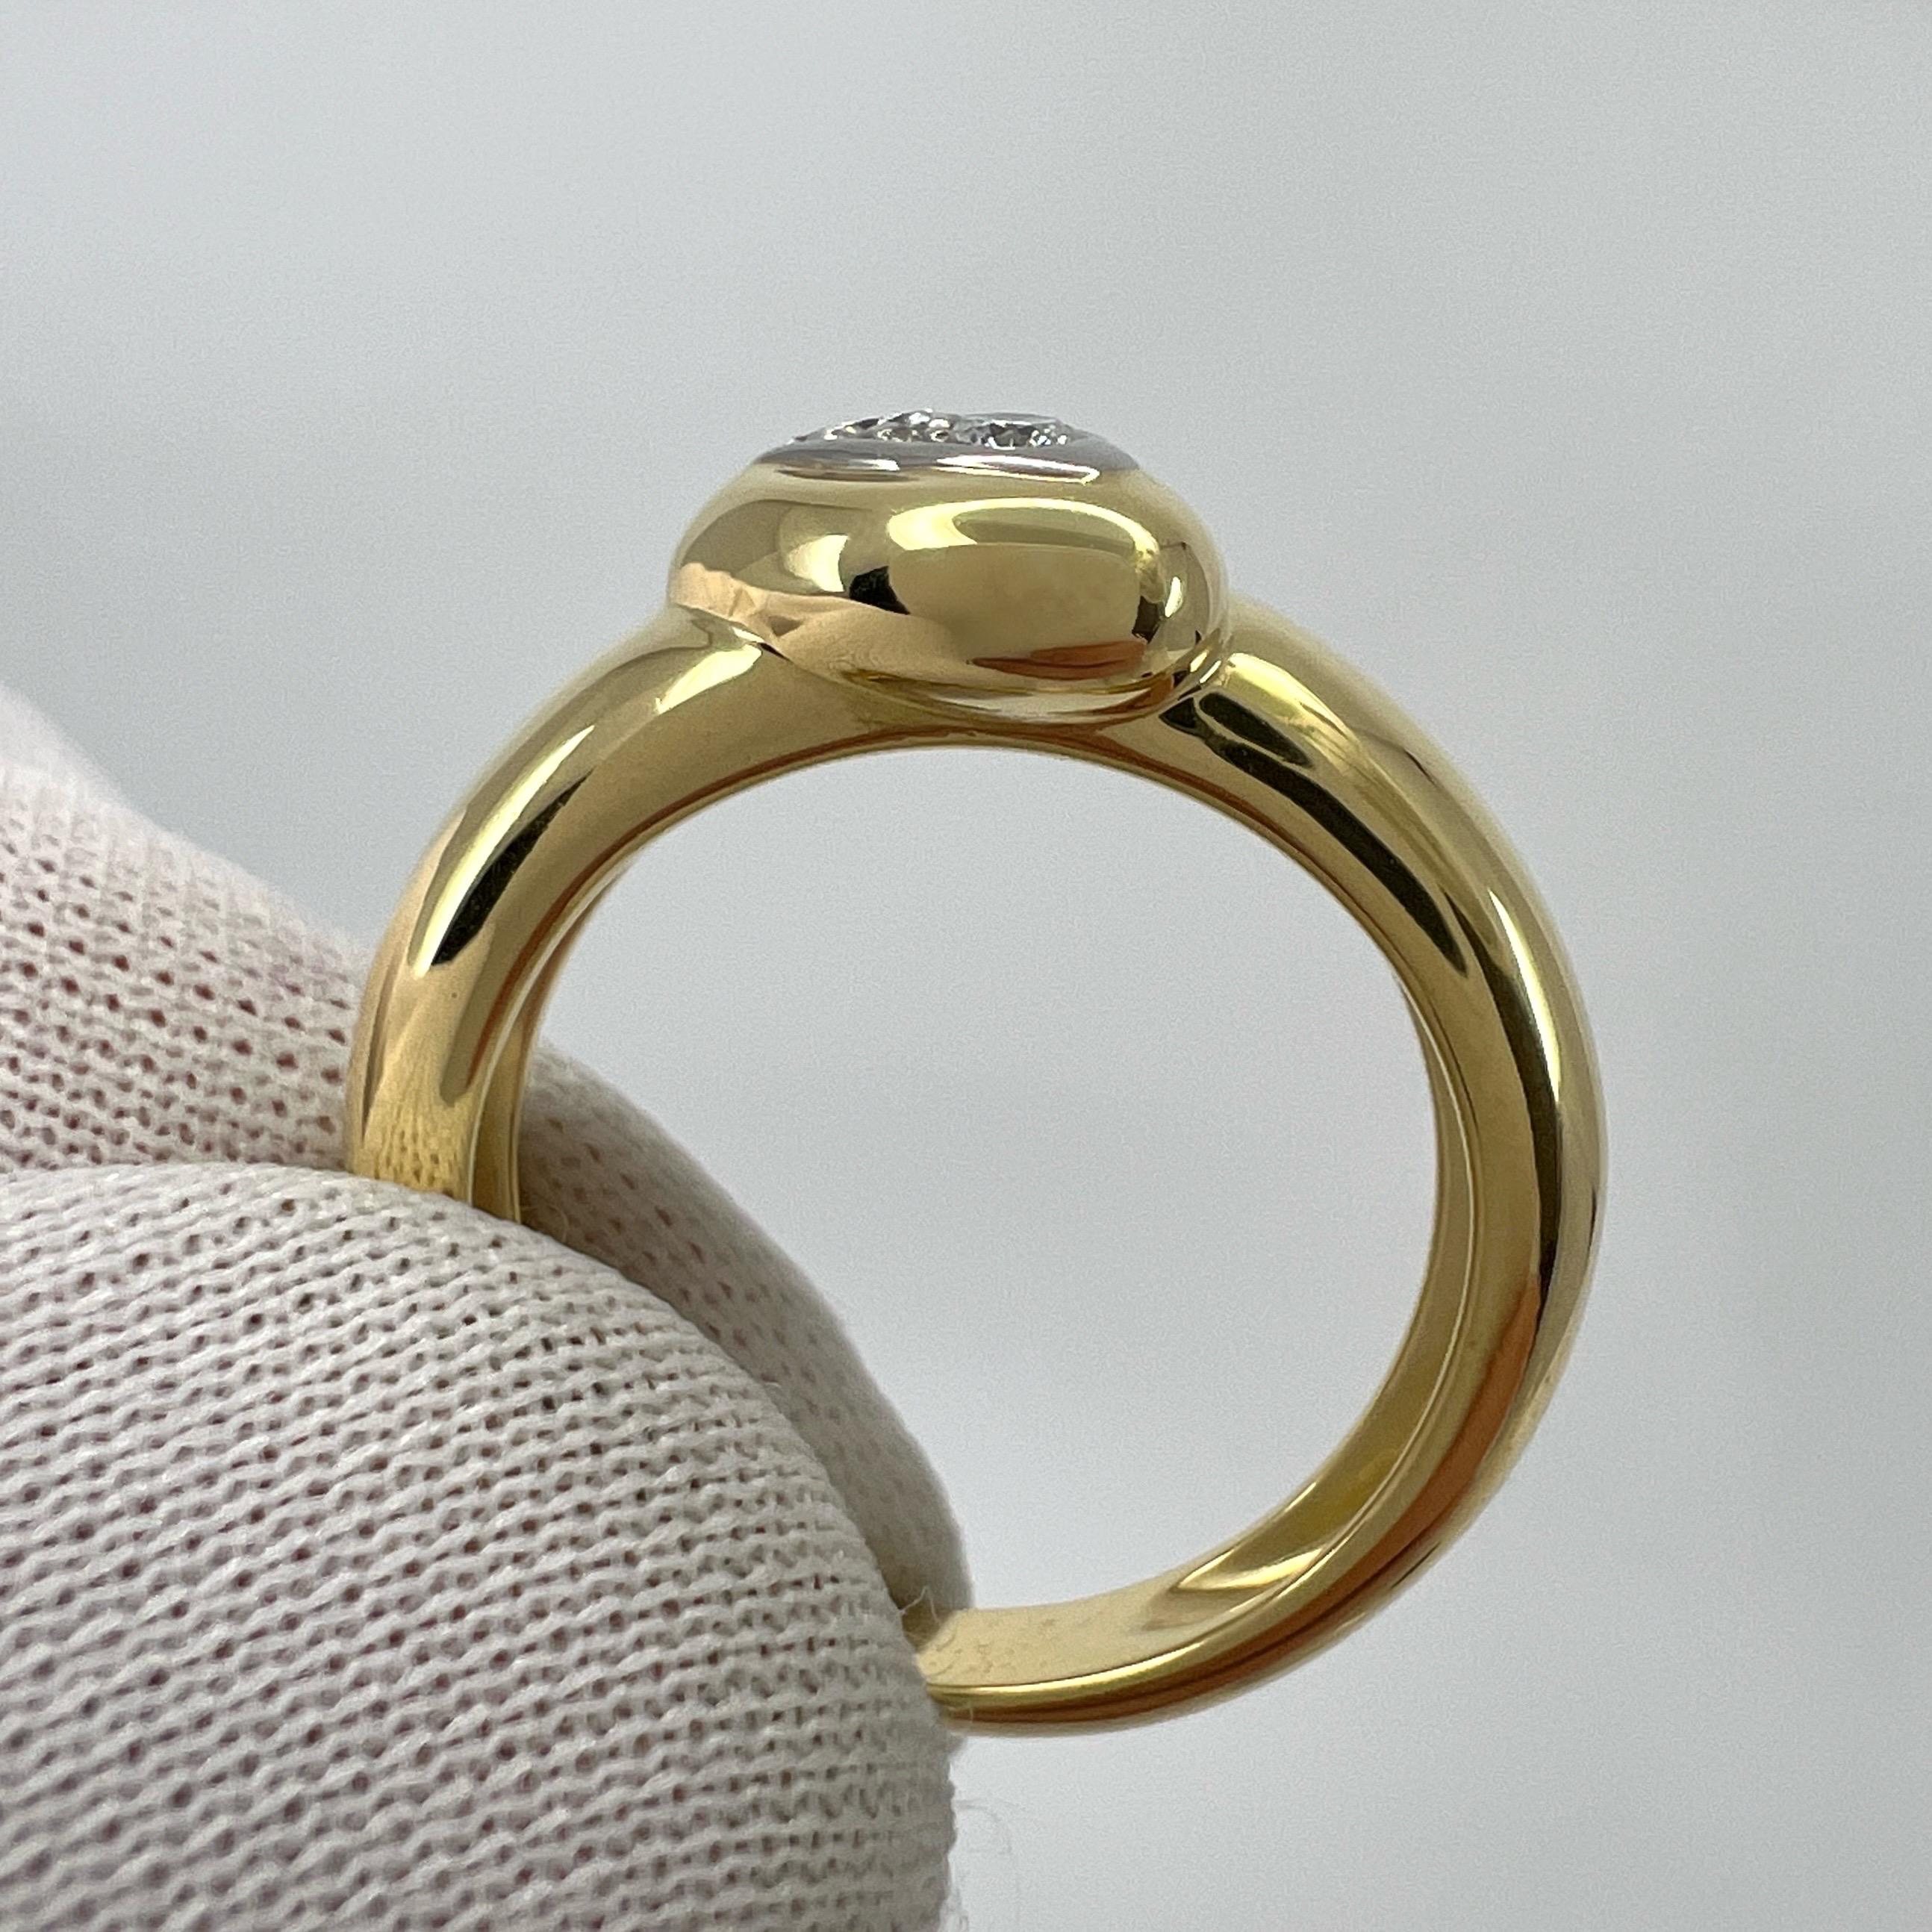 Rare Vintage Van Cleef & Arpels Diamond Heart Dome 18k Yellow Gold Platinum Ring For Sale 1